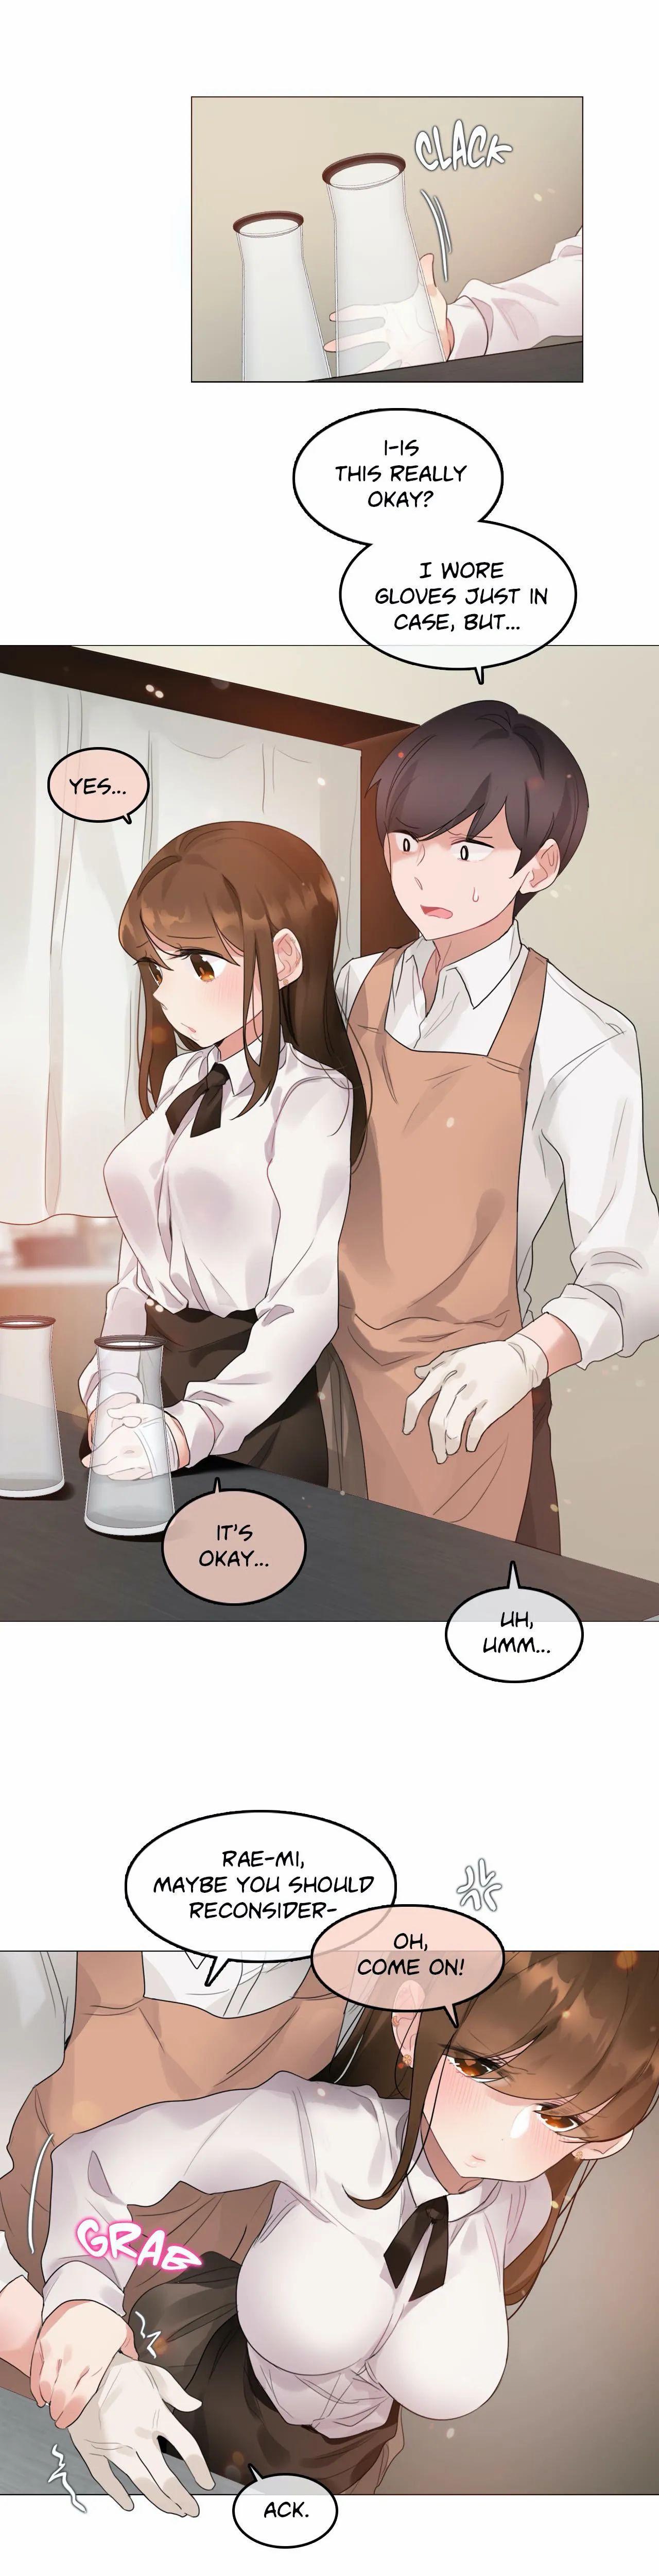 Perverts' Daily Lives Episode 1: Her Secret Recipe Ch1-19 124